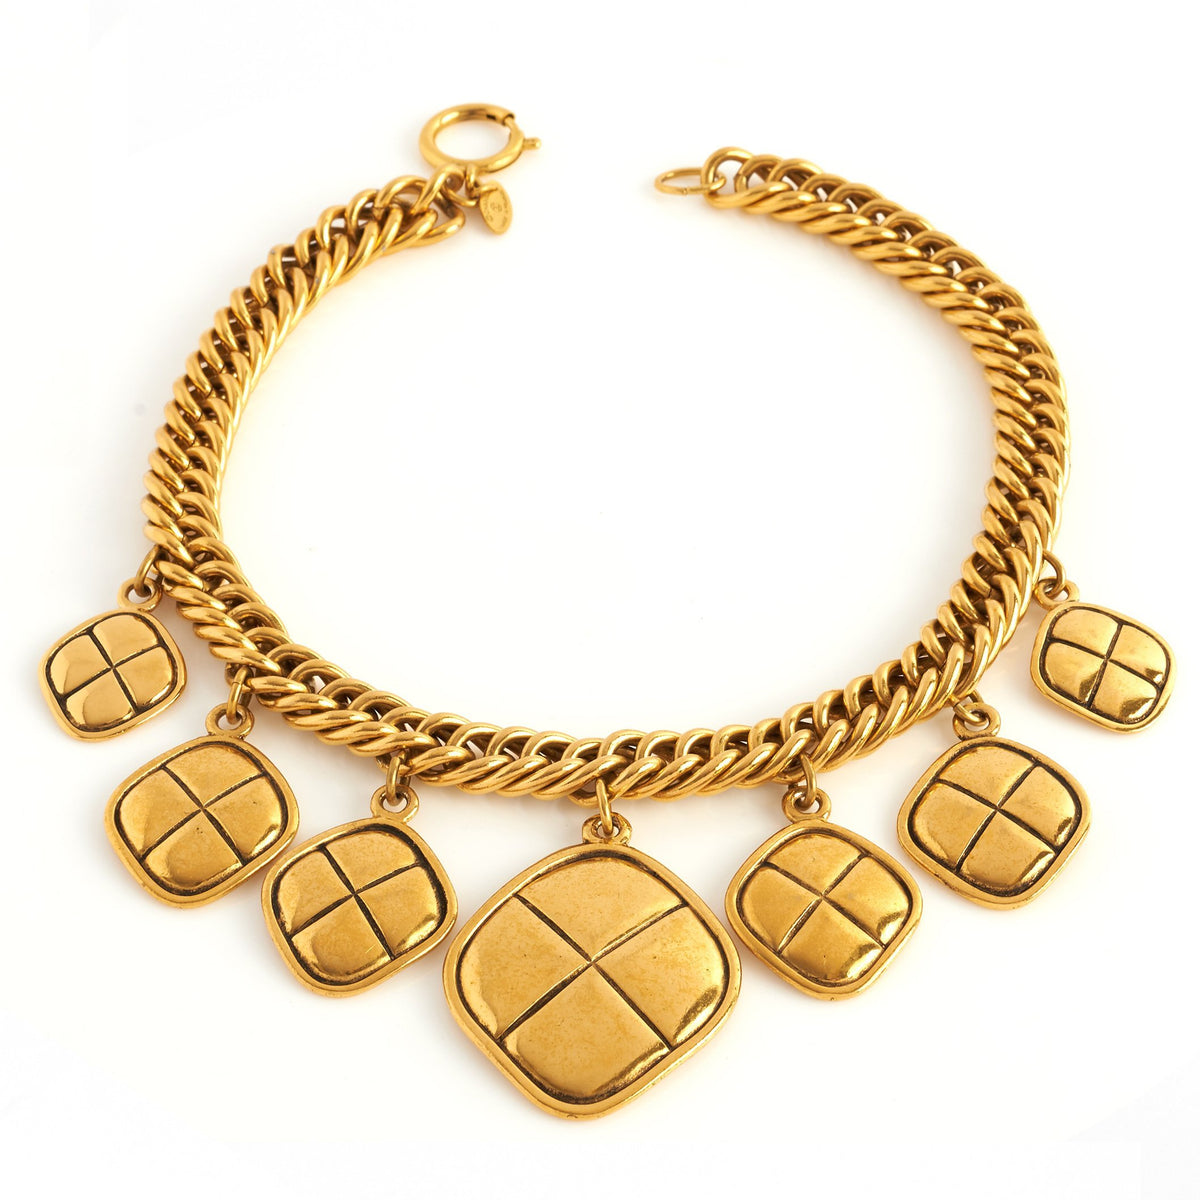 Chanel Matelasse Charm Necklace, Gold Plated, Vintage - 1991